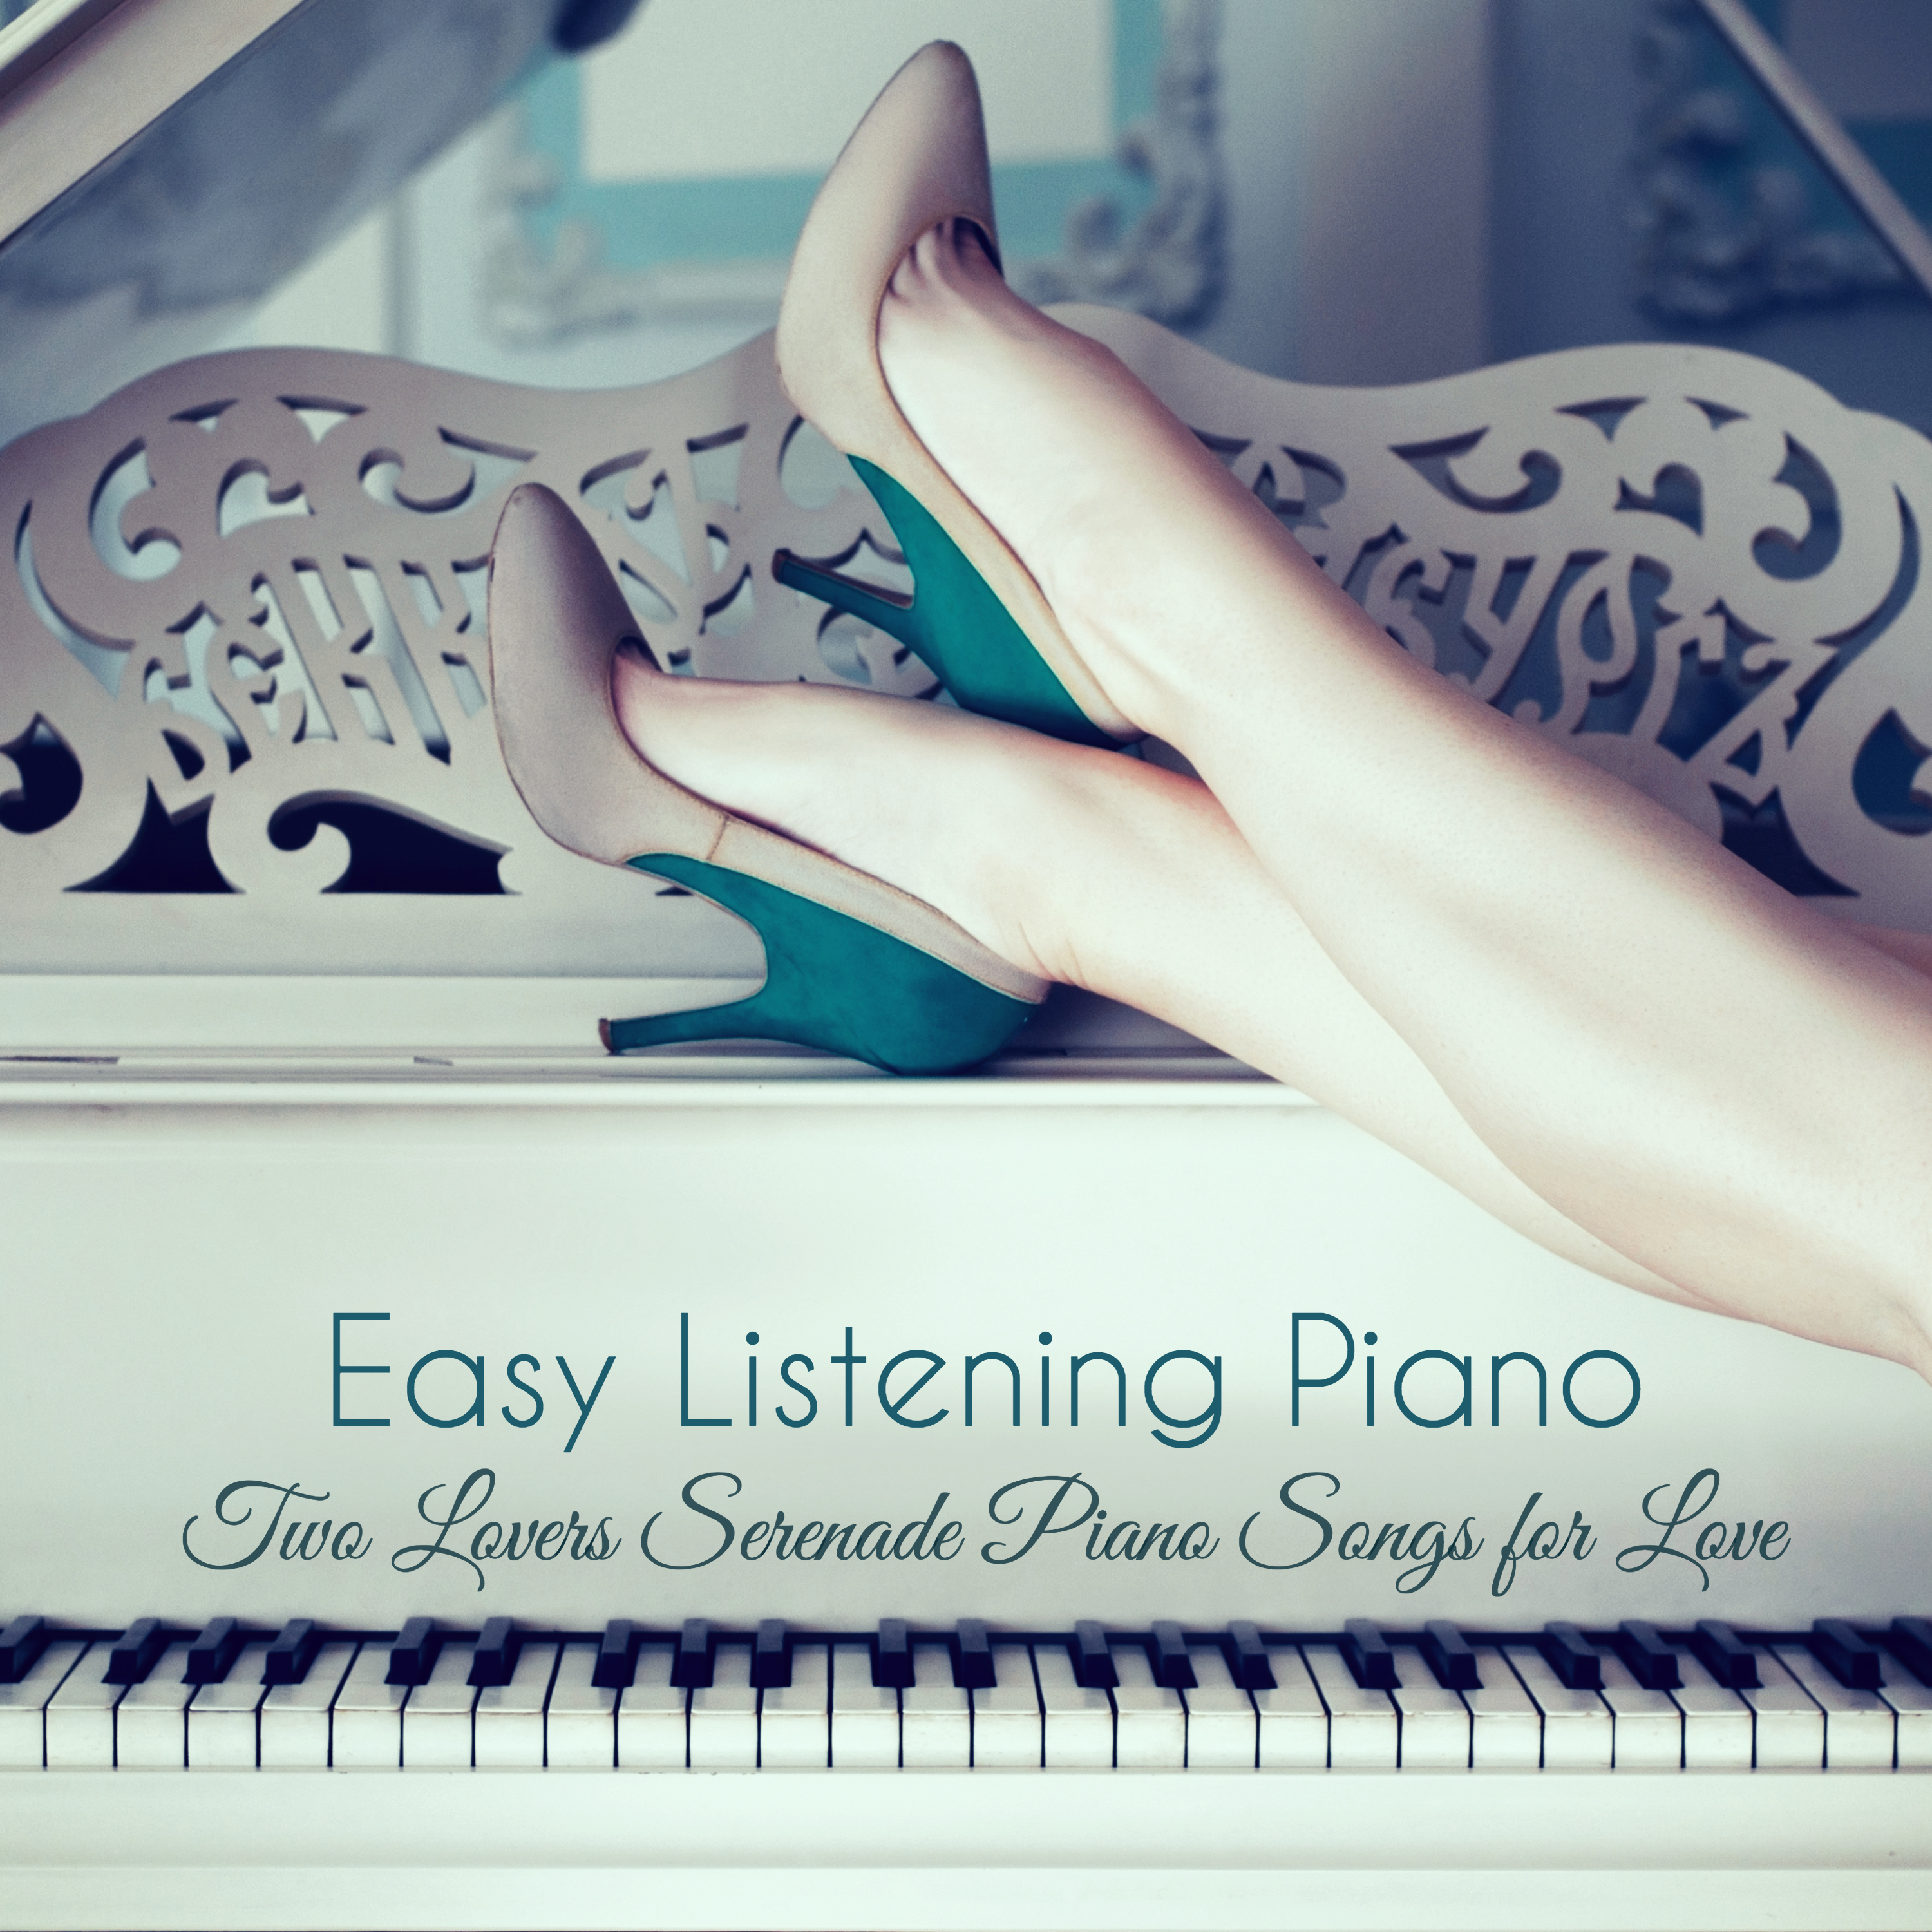 Easy Listening Piano – Romantic Piano Moods for Dinner, Two Lovers Serenade Piano Songs for Love